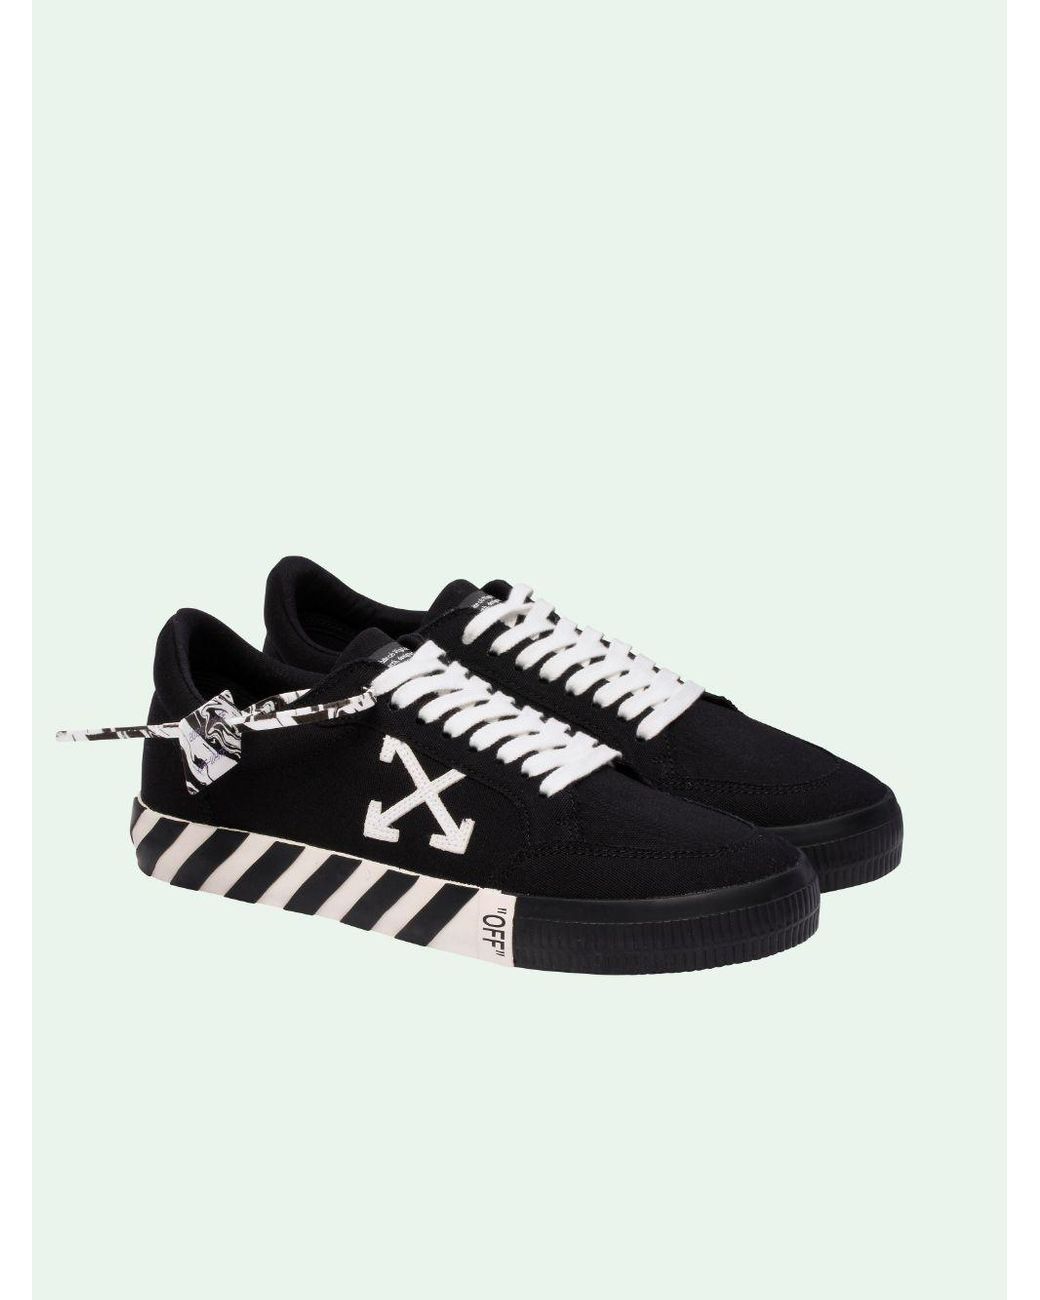 Off-White c/o Virgil Abloh Vulcan Low Leather Trainers in Black/White ...